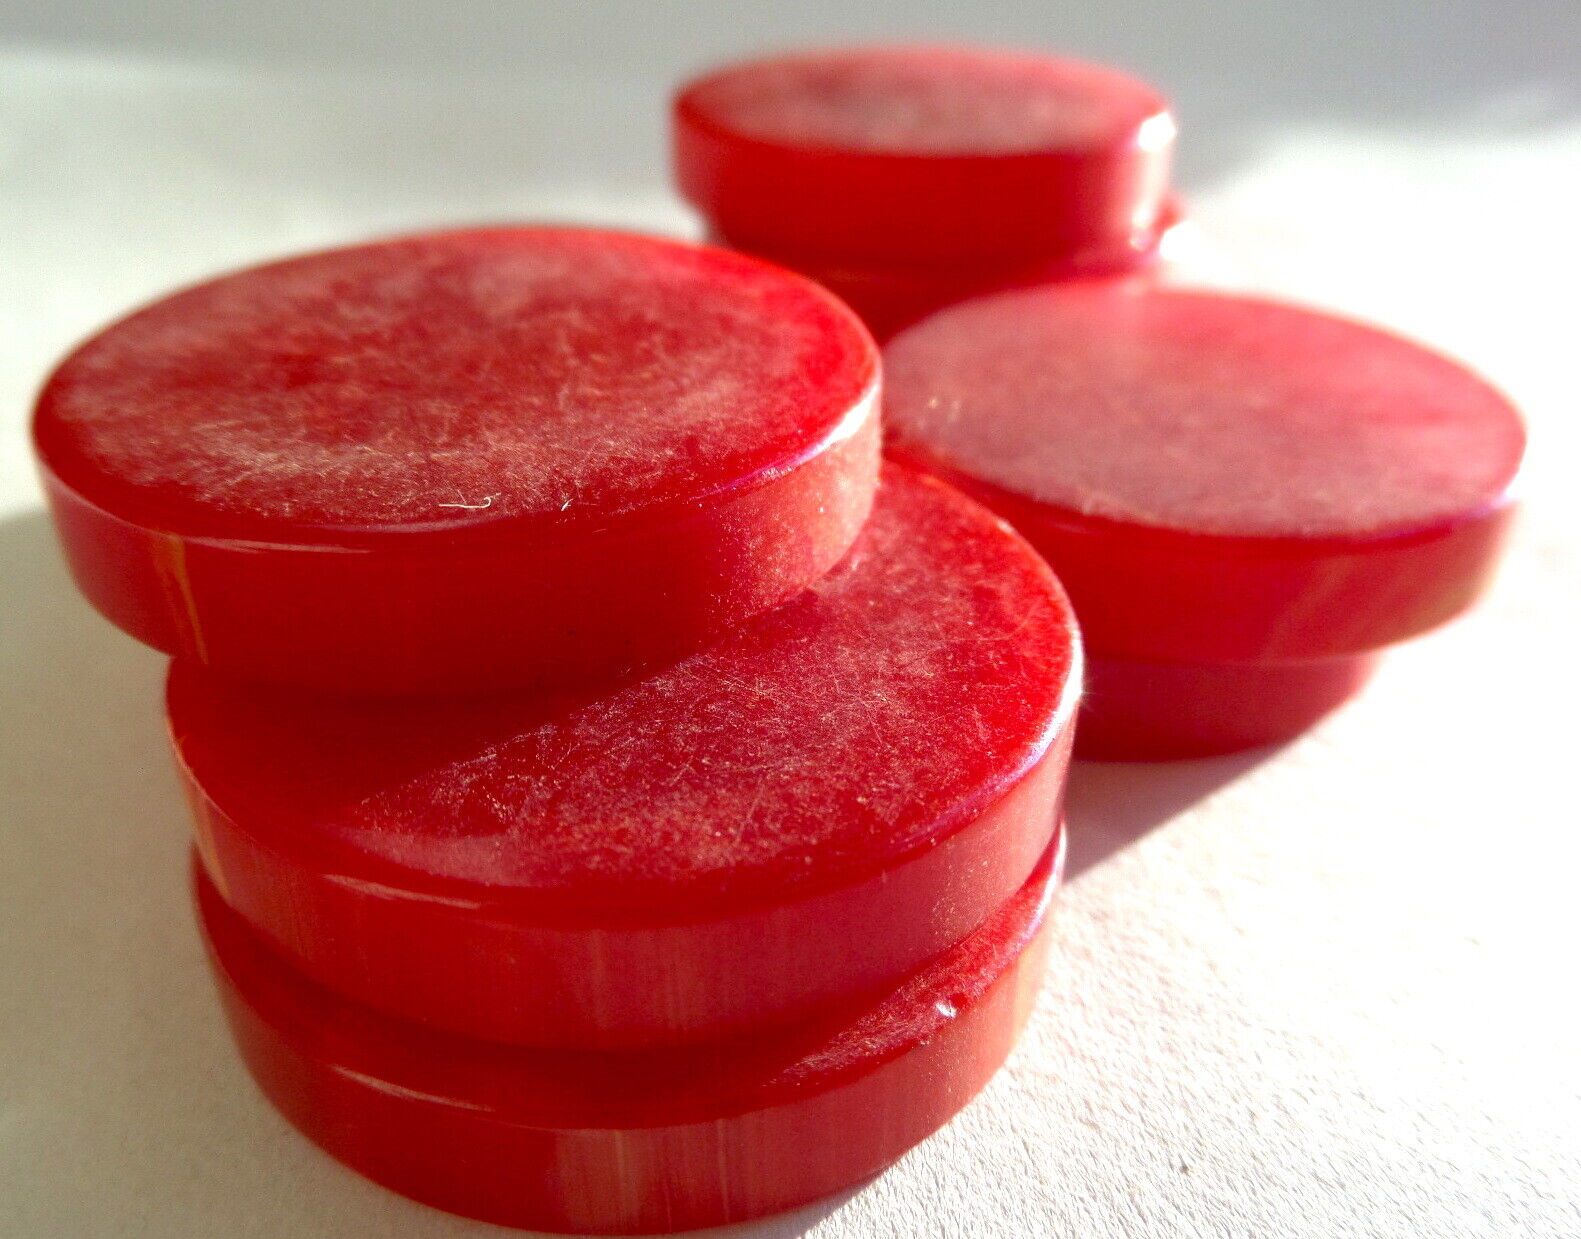 LOT 10 CATALIN Backgammon Red Marbeized 30mm x 5mm Thick (1.1/8 in) by Bakelite Без бренда - фотография #3